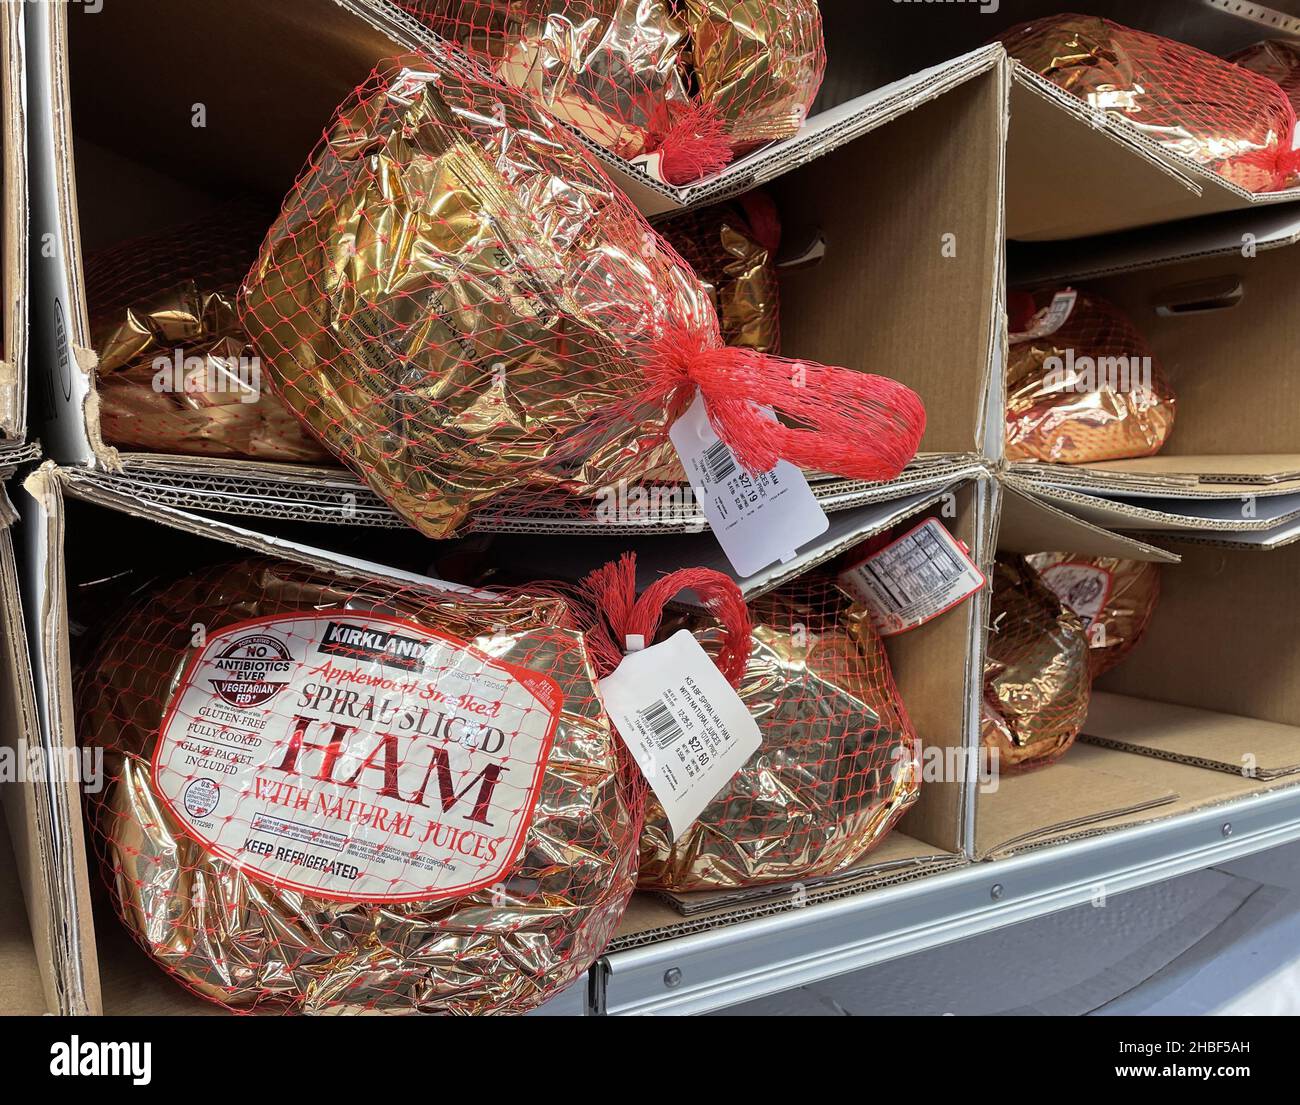 FRESNO, UNITED STATES - Nov 16, 2021: A Close up of Costco Store Ham for the Holidays wrapped on shelves Stock Photo